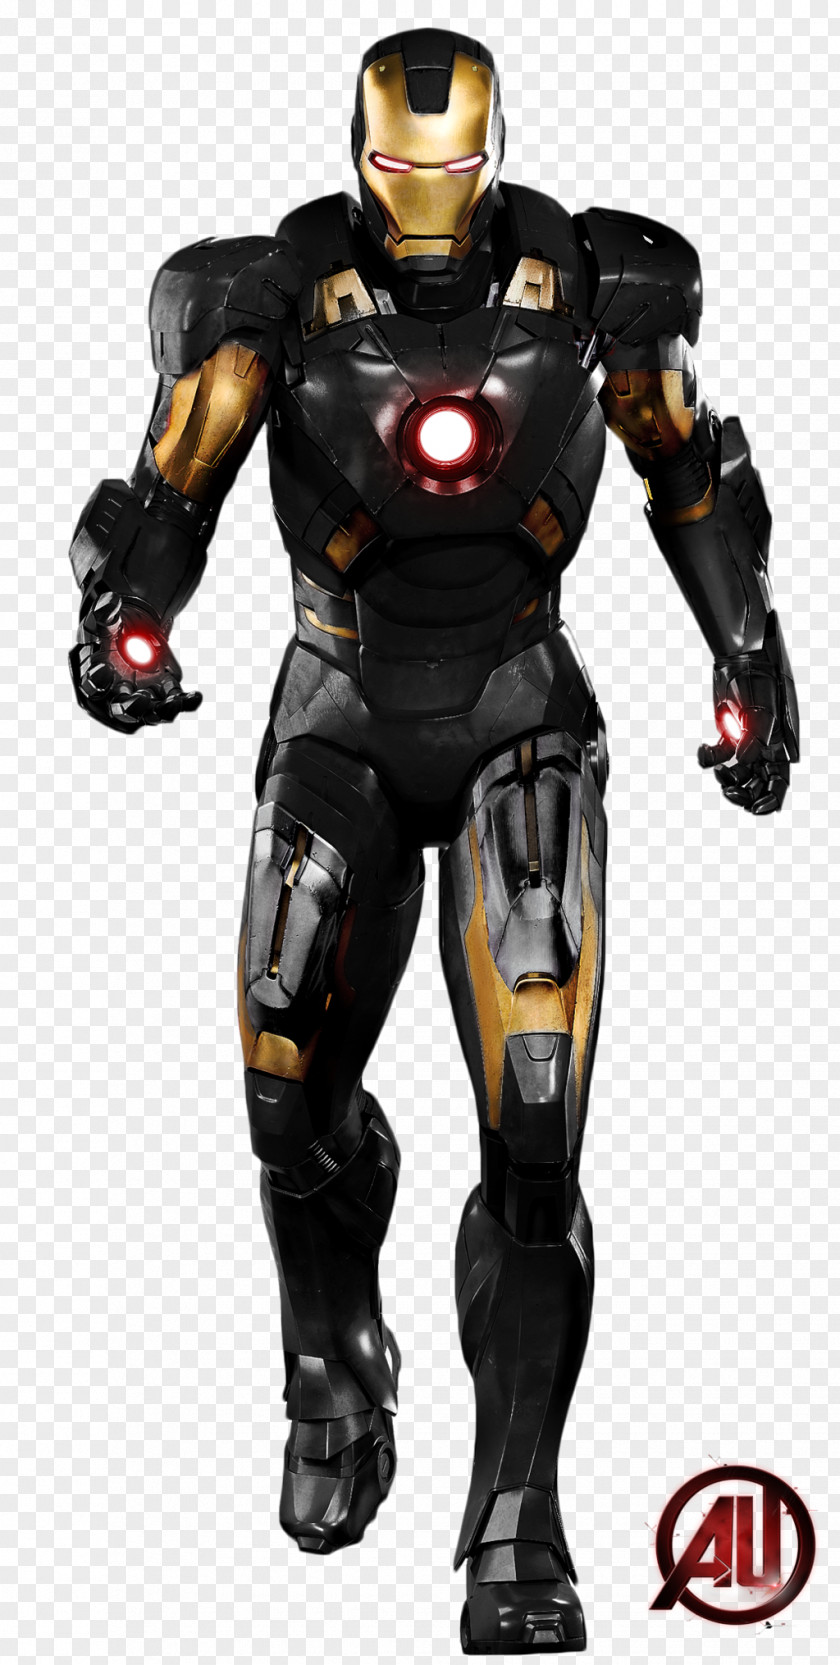 Ultron Iron Man Marvel Cinematic Universe Captain America PNG